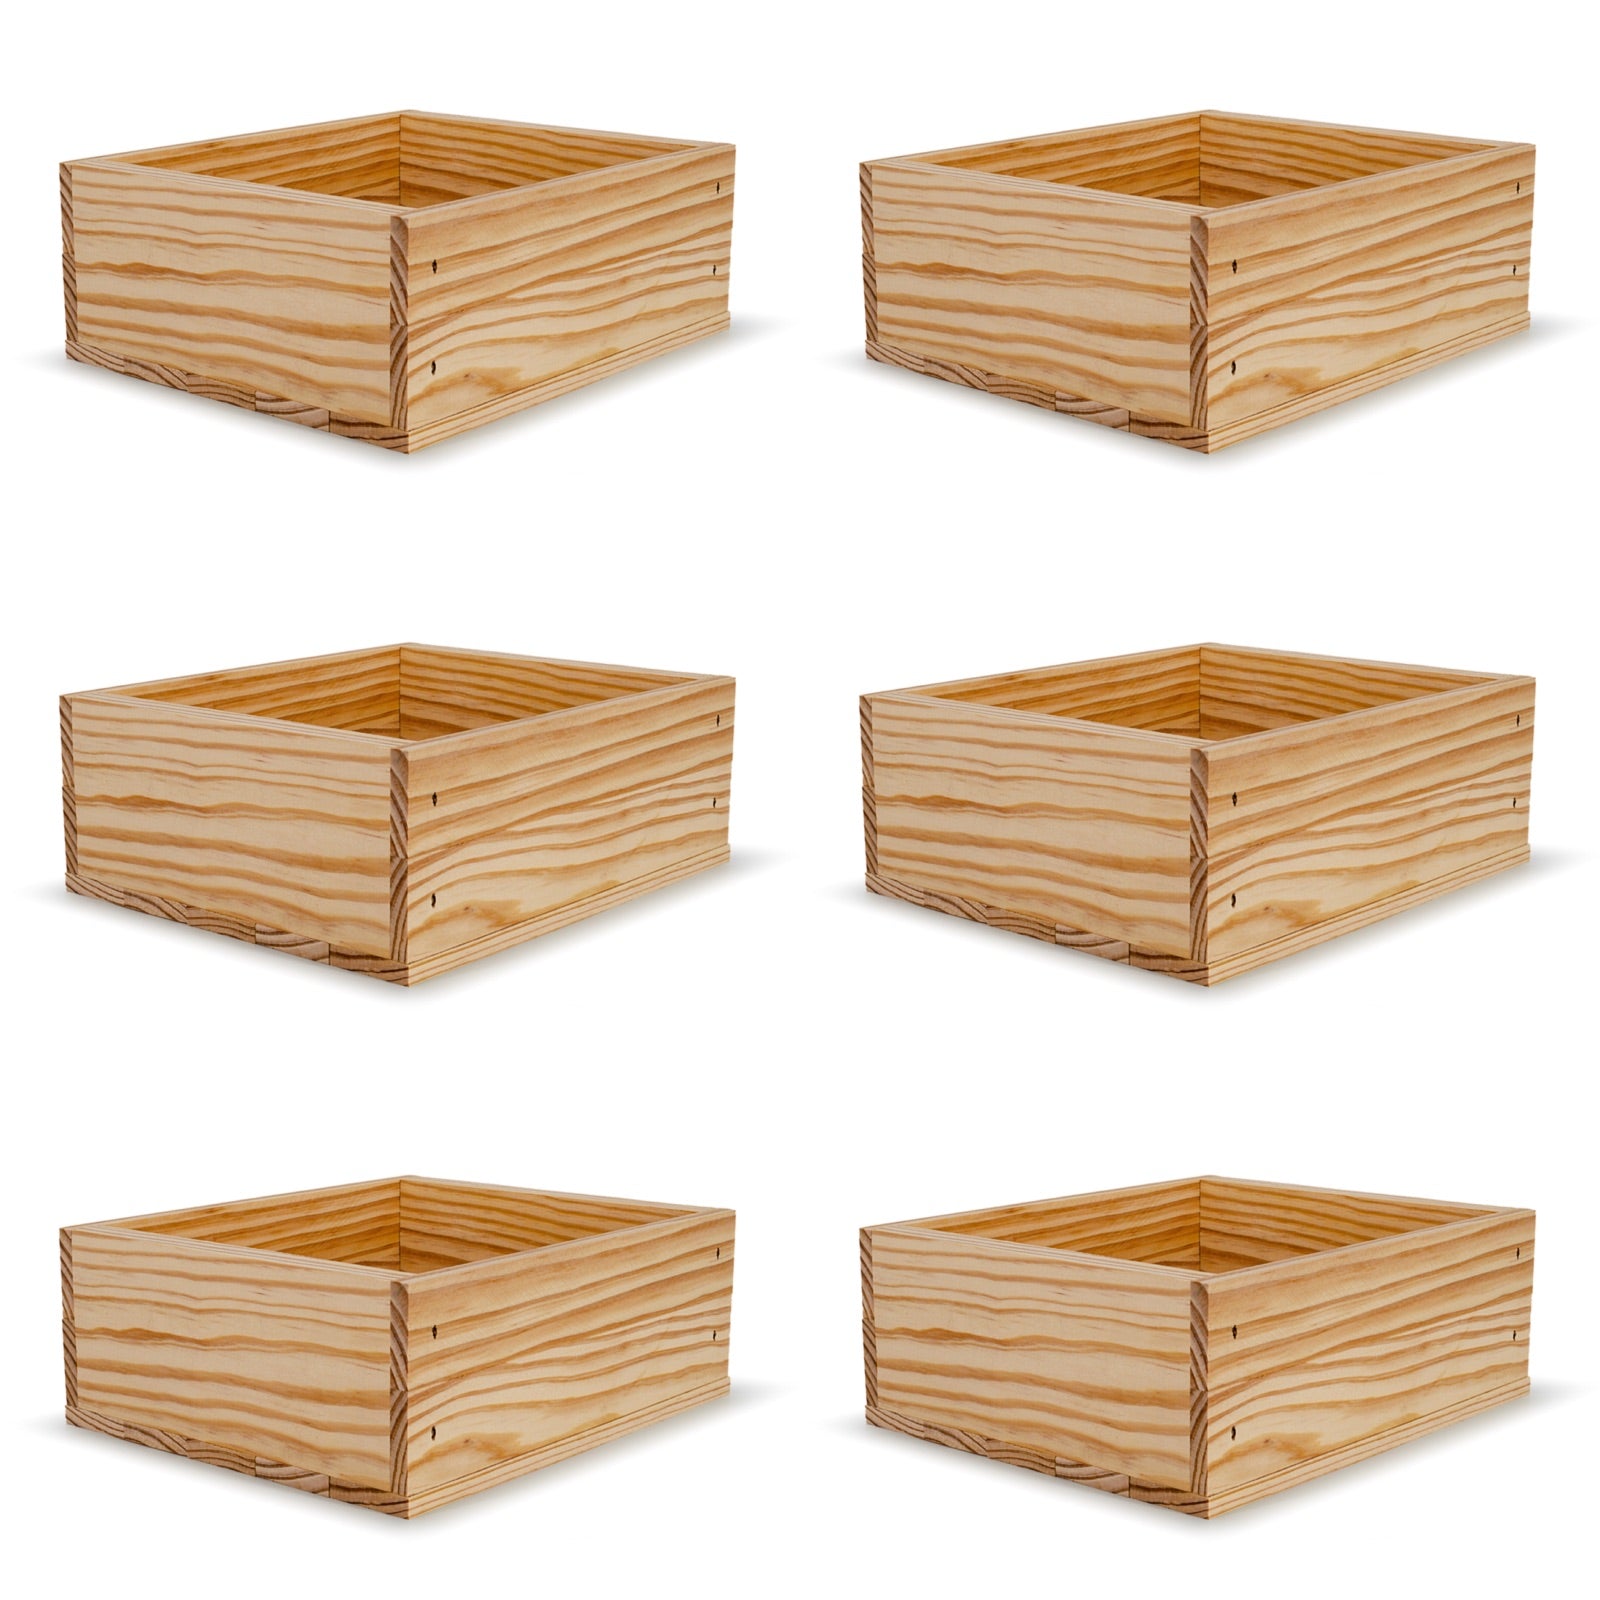 6 Small wooden crates 9x8x3.5